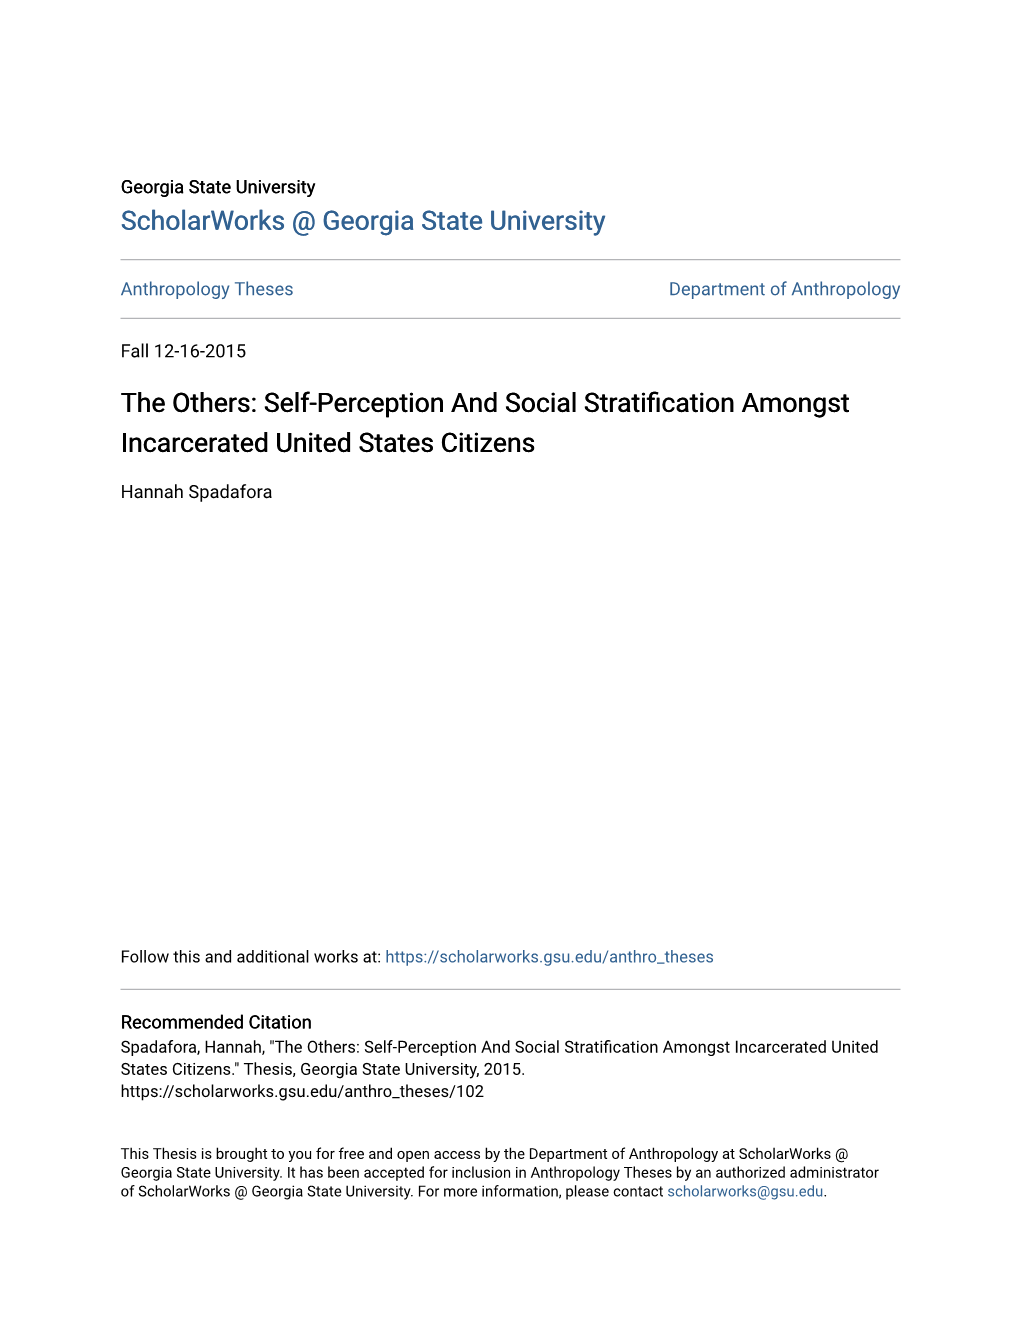 Self-Perception and Social Stratification Amongst Incarcerated United States Citizens